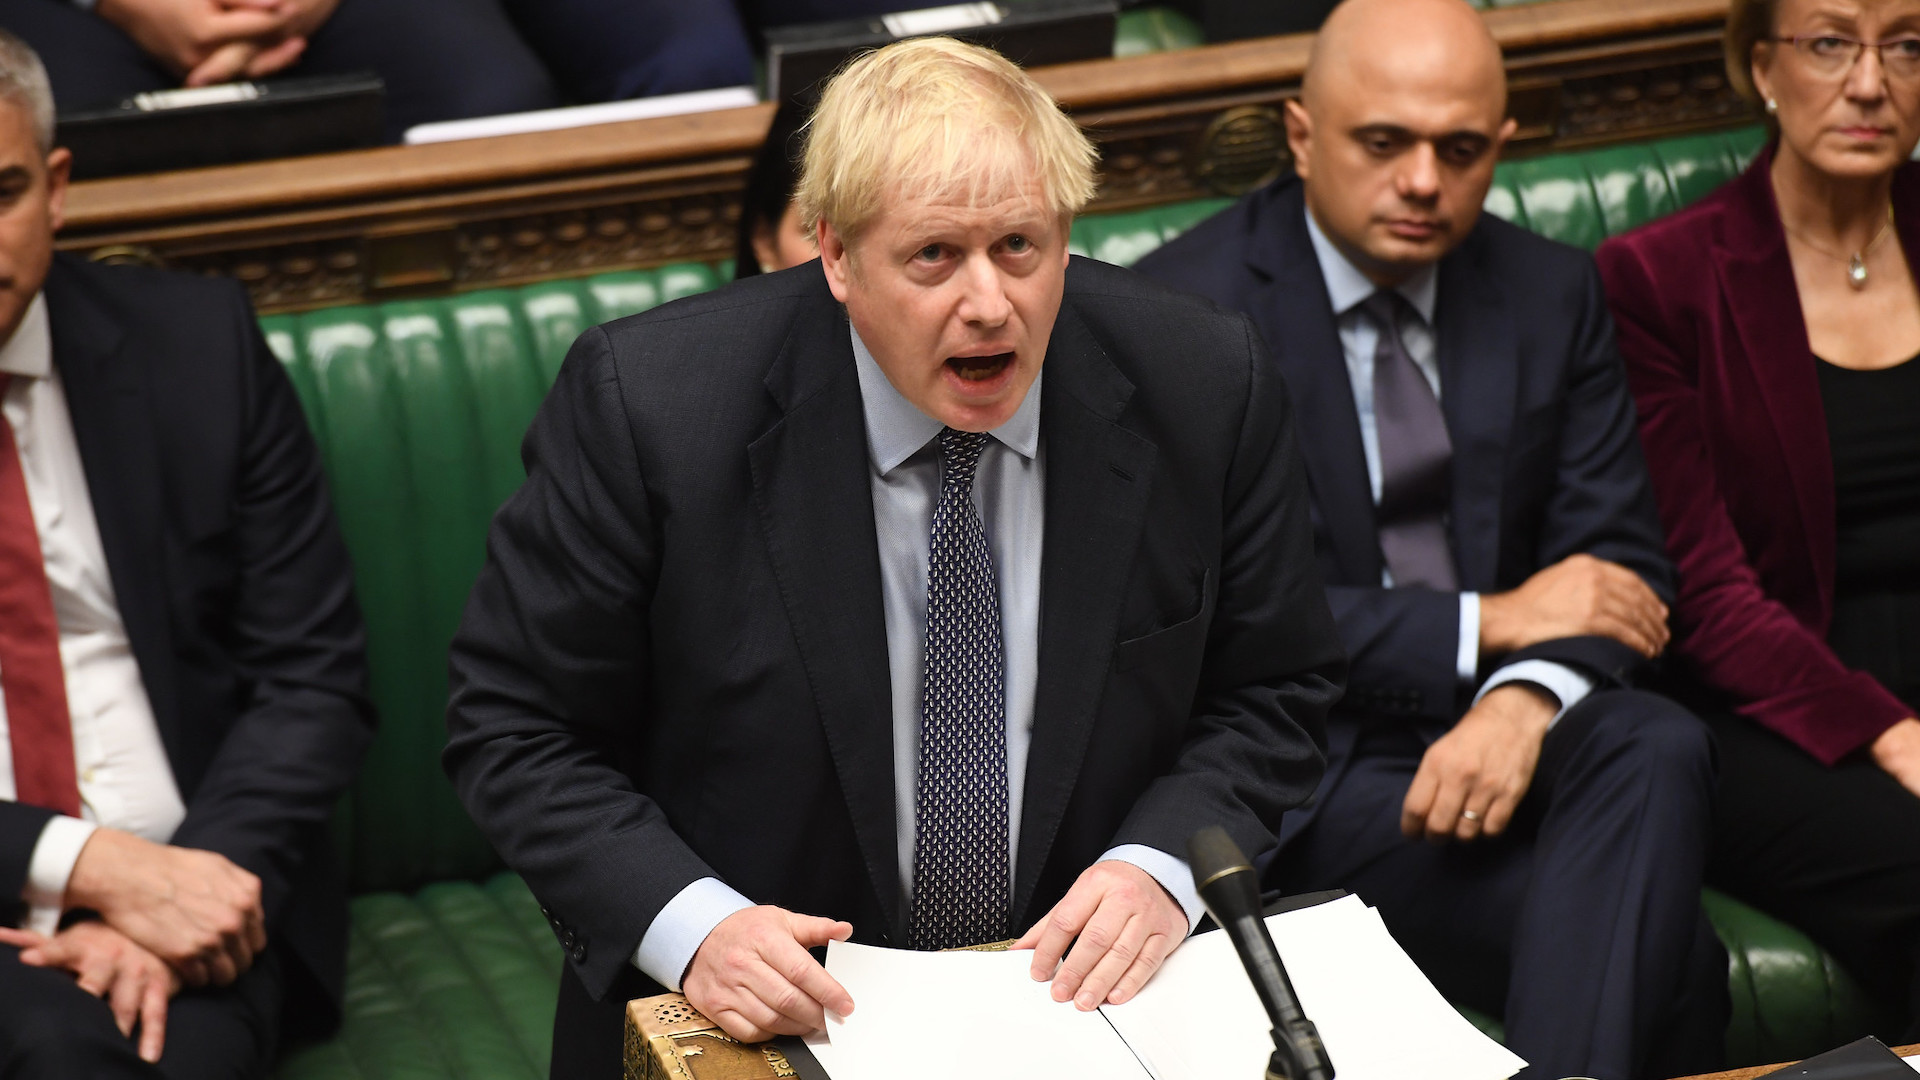 Boris Johnson told parliament there were fewer children in poverty now compared to a decade ago.